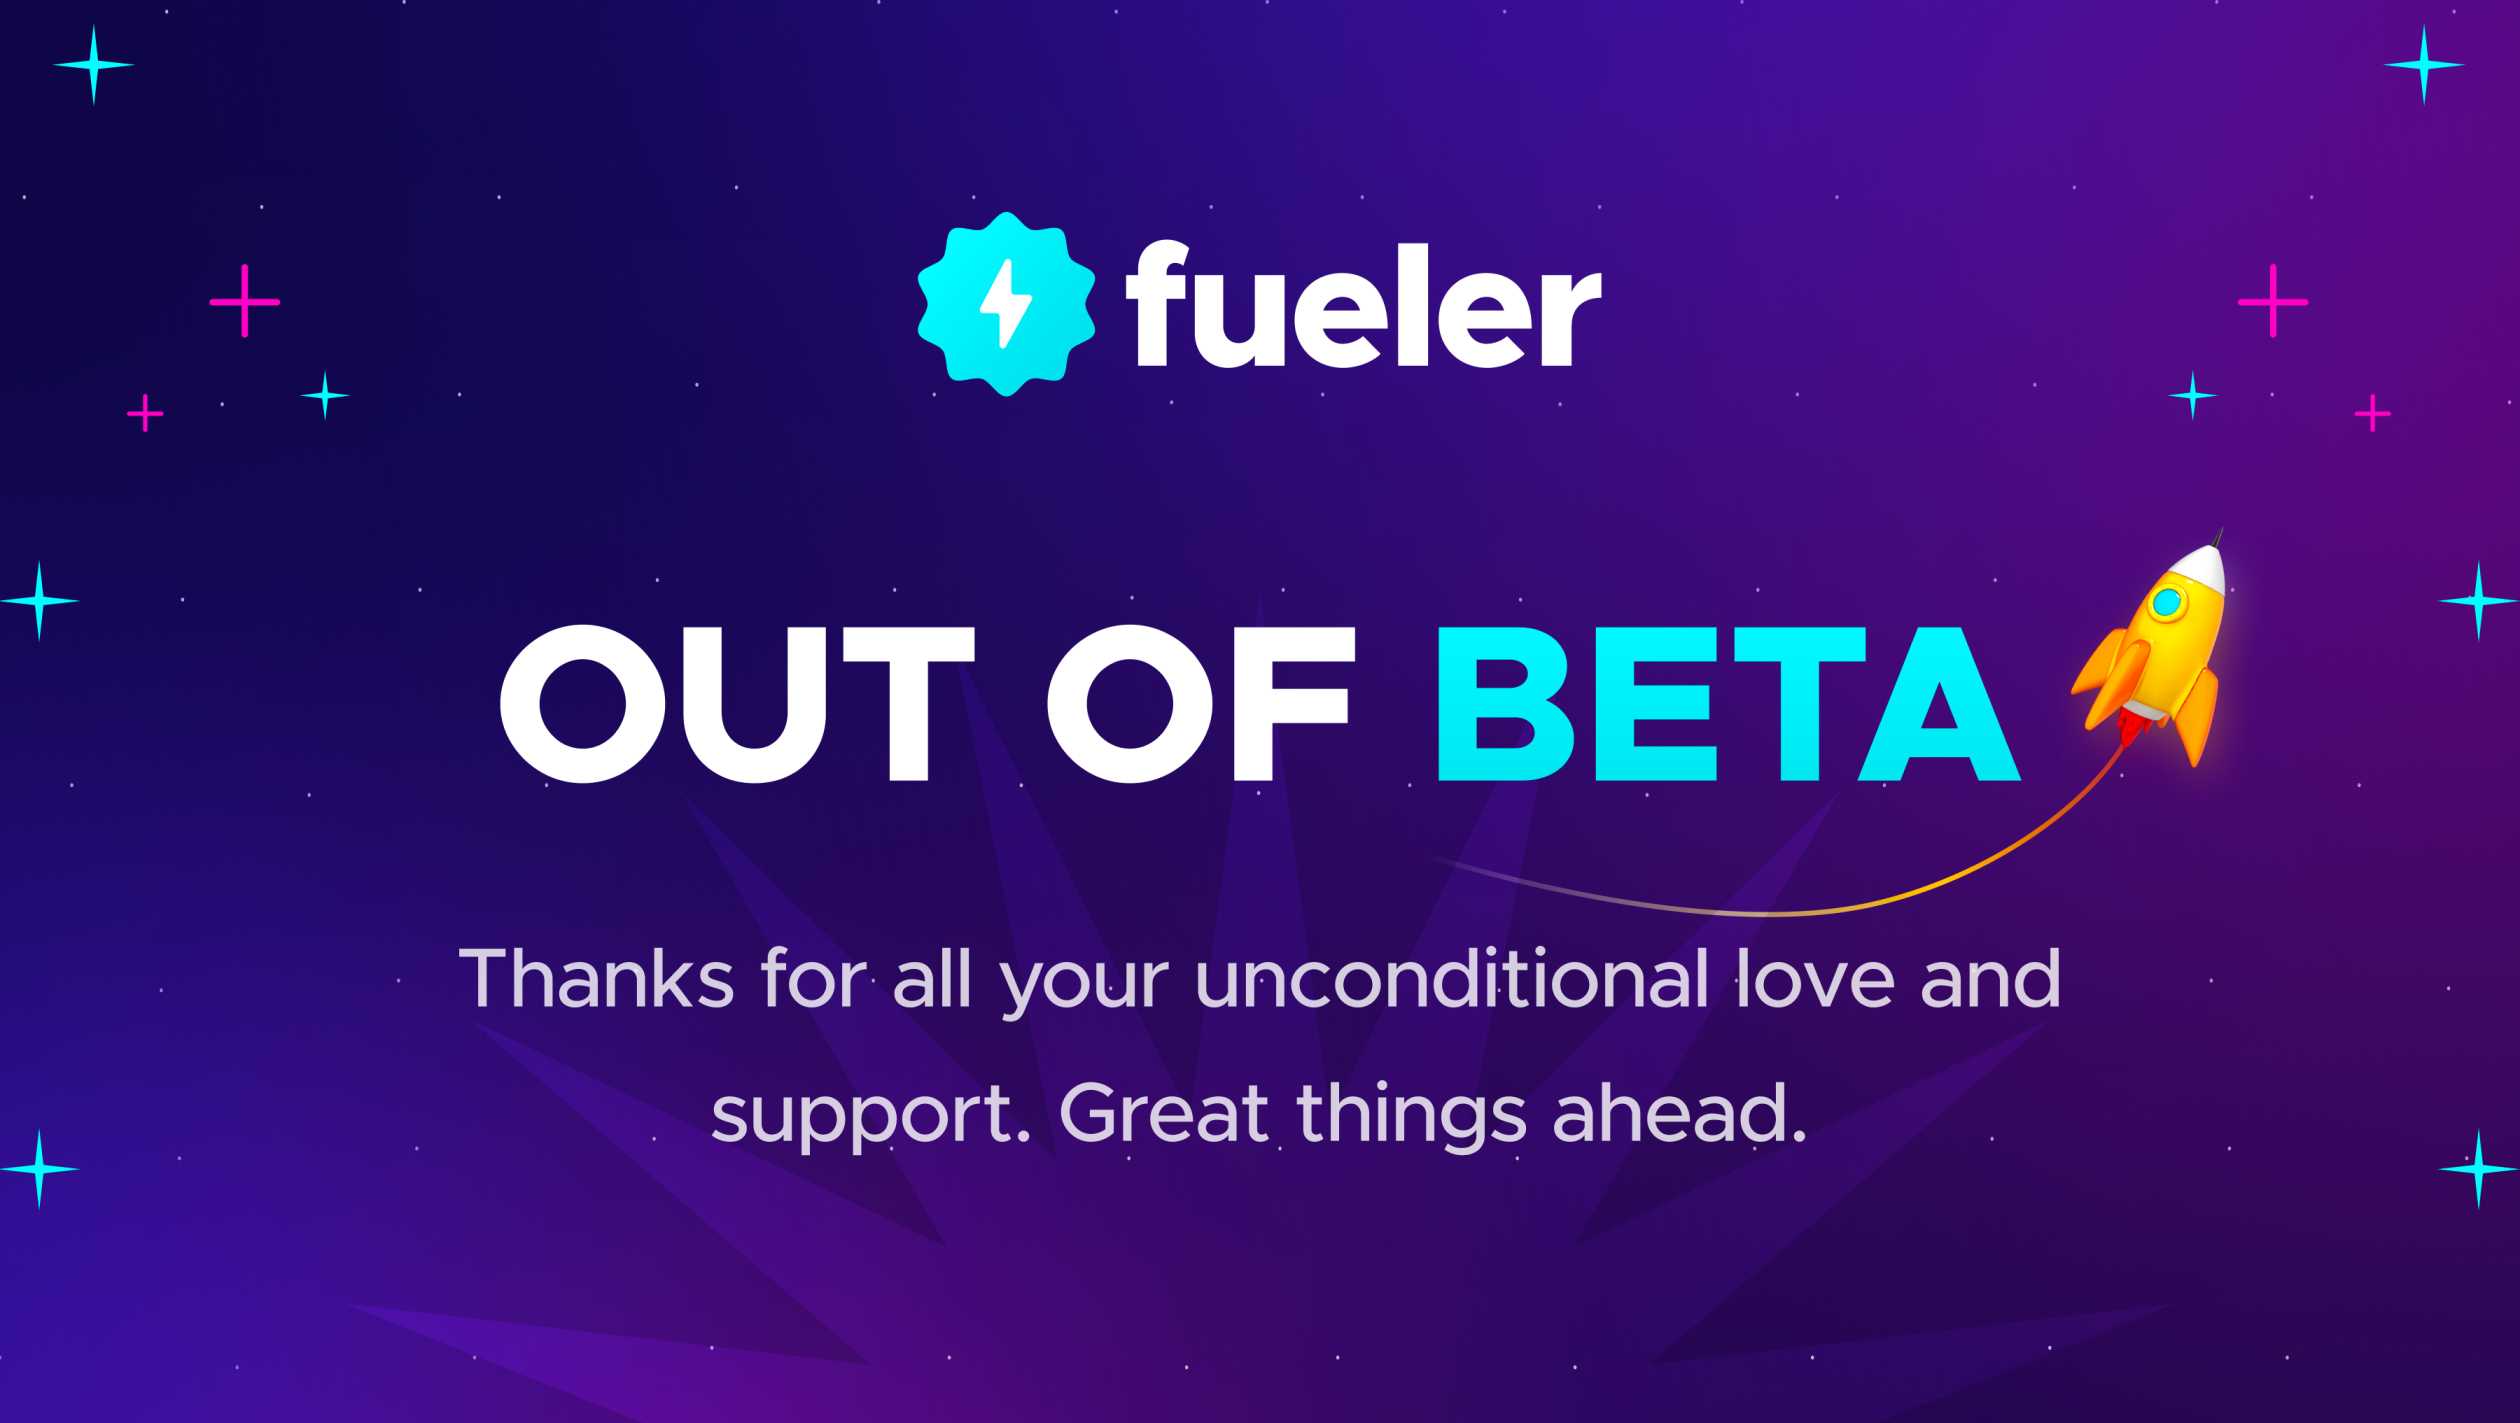 Fueler is out of Beta || Fueler.io